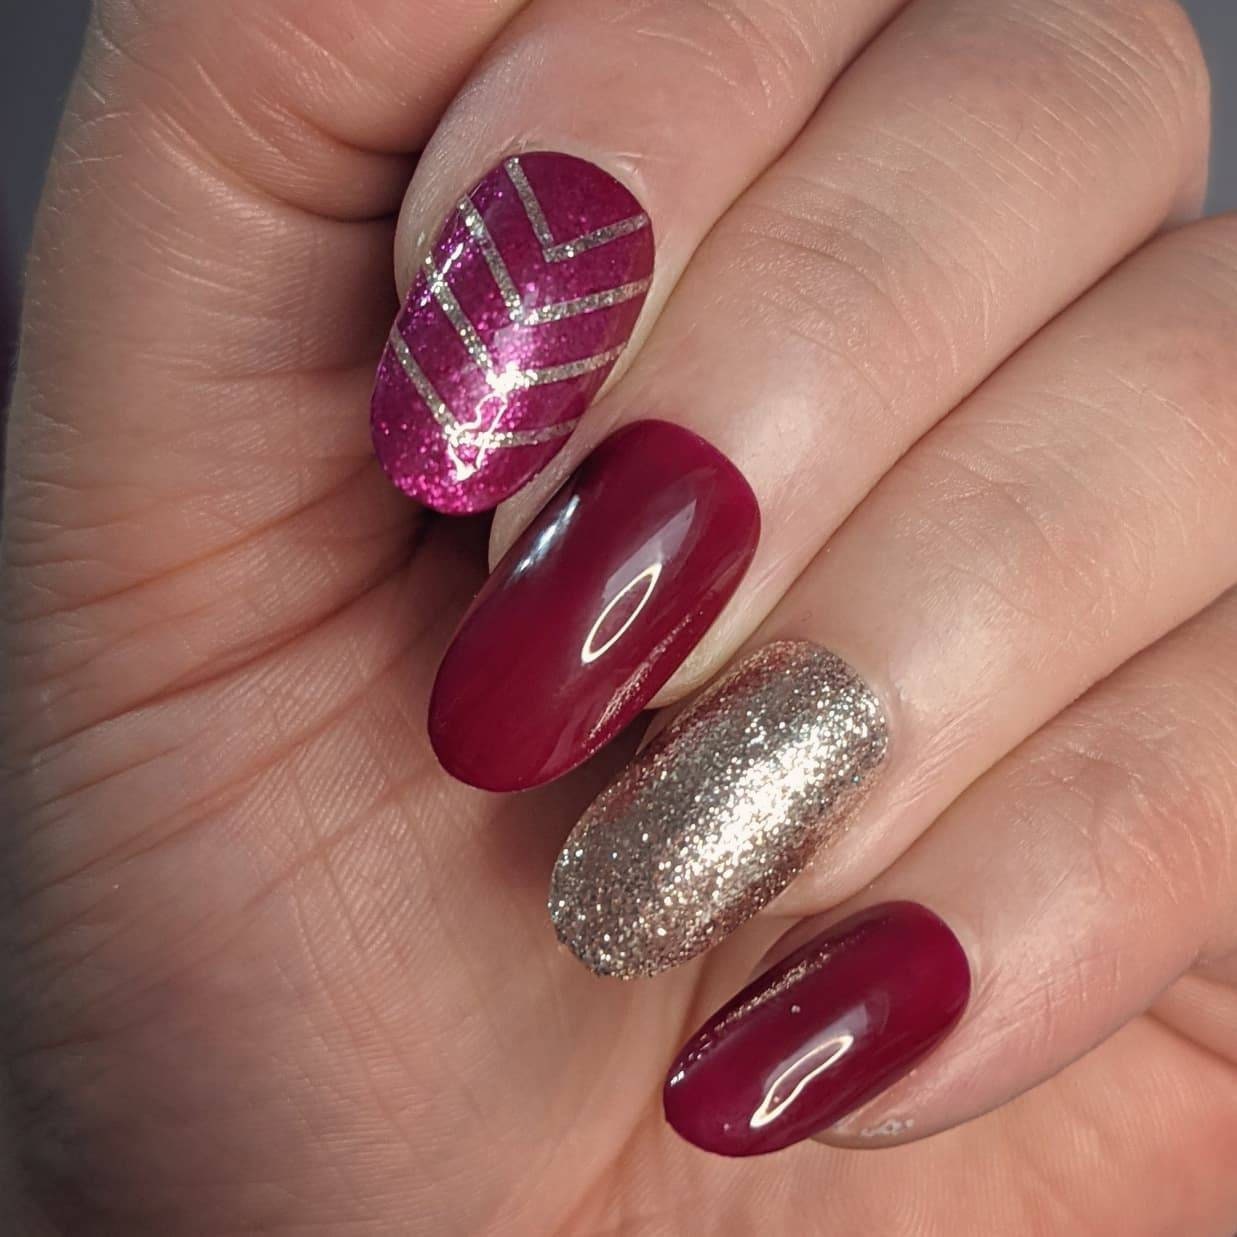 Get Classy Christmas Nail Art Designs This Year For A Festive Look!